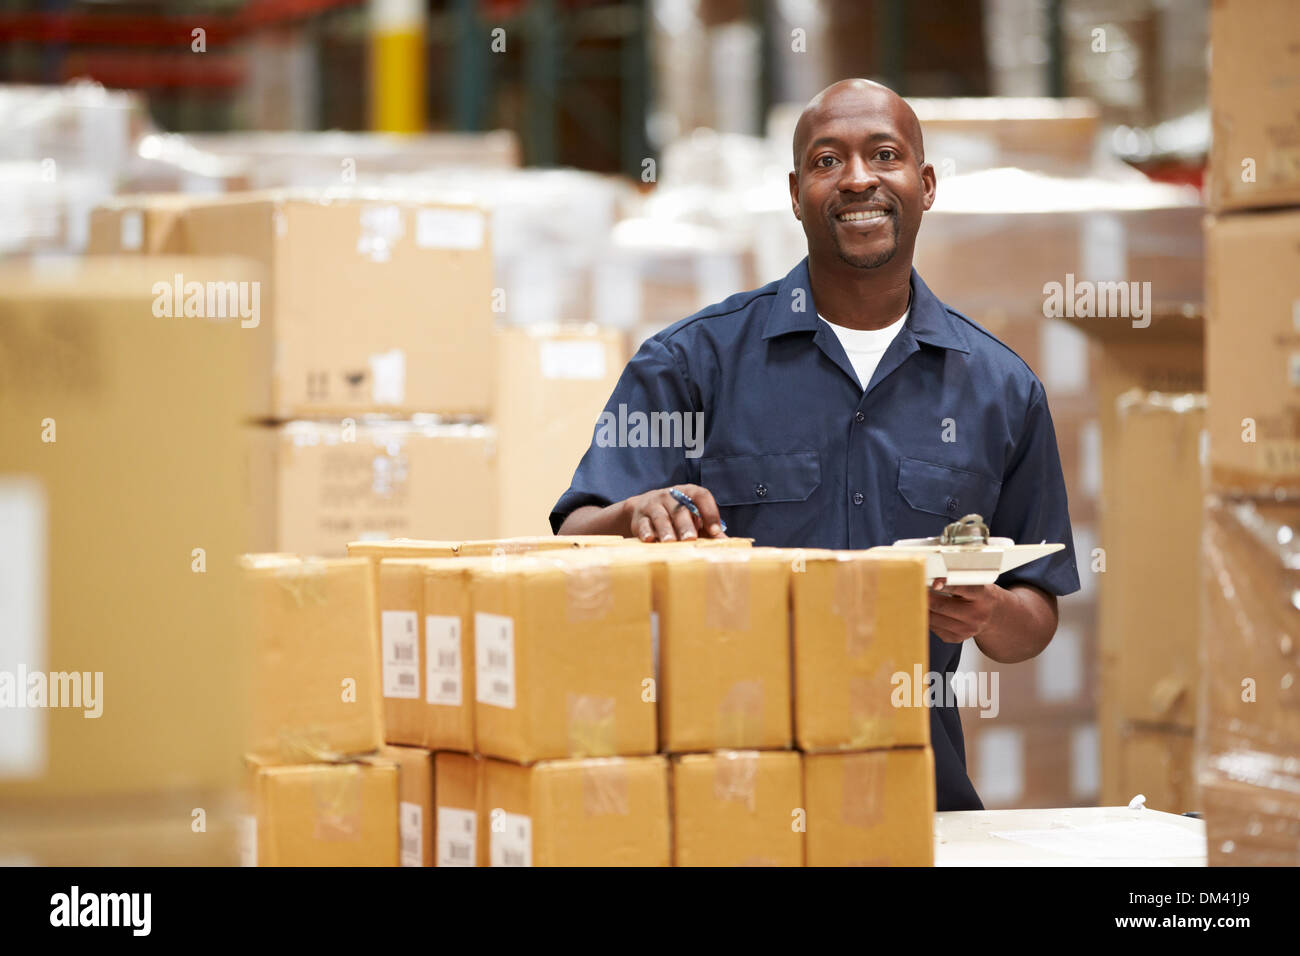 Worker In Warehouse Preparing Goods For Dispatch Stock Photo